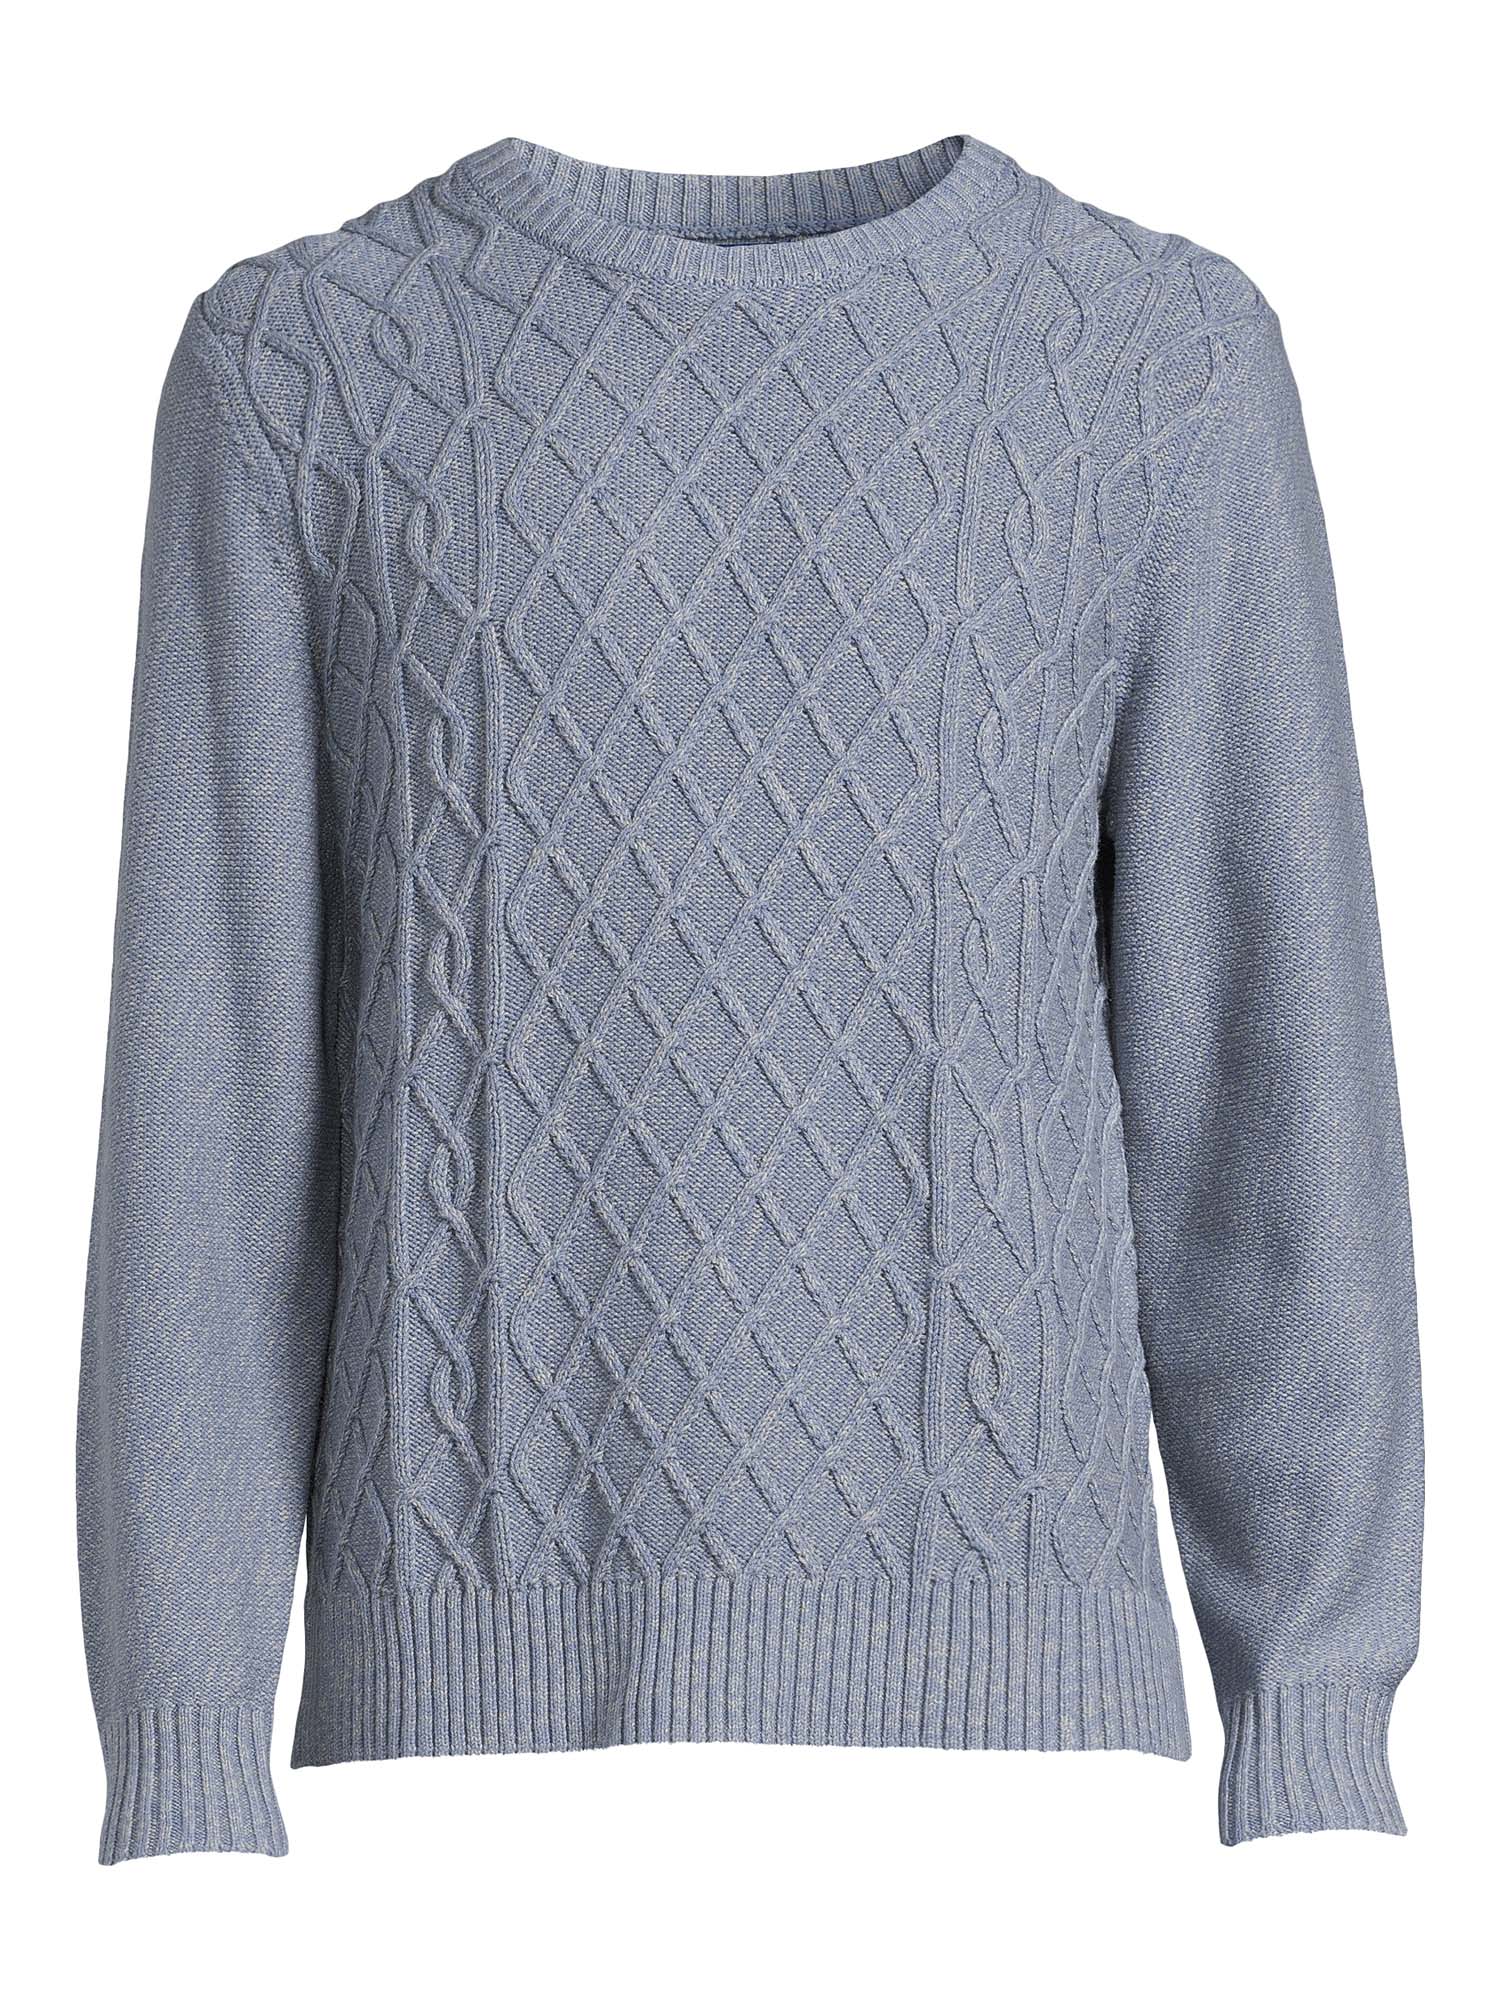 George Men's Marled Sweater with Long Sleeves, Sizes S-3XL - image 5 of 5